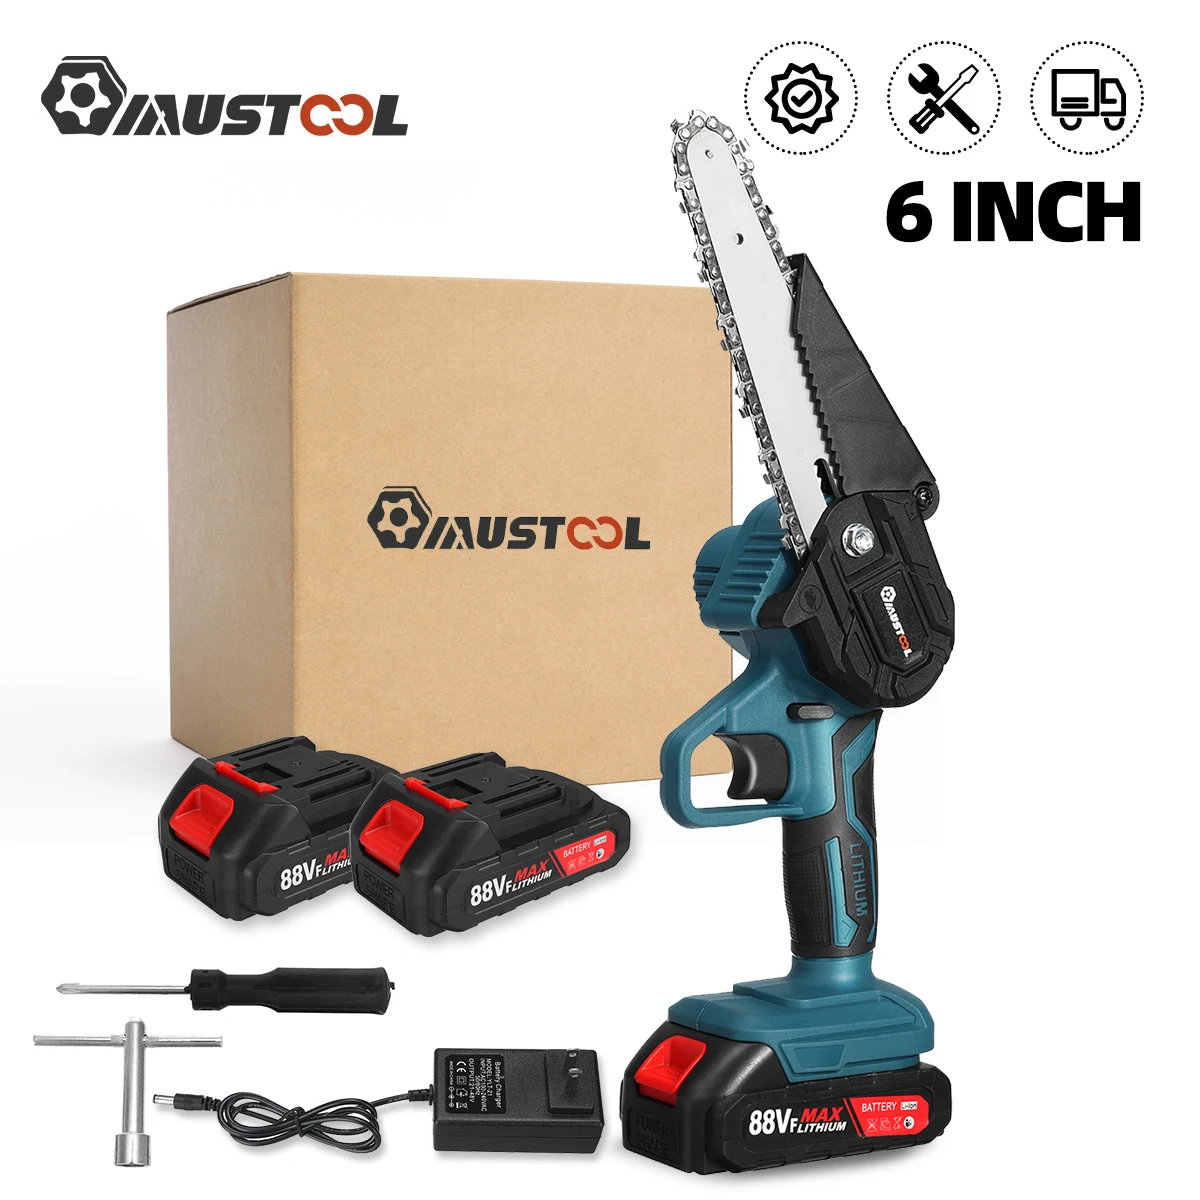 MUSTOOL 6 Inch Mini Electric Chainsaw Rechargeable Garden Tree Logging Saw Woodworking Tools Wood Cutter For Makita 18V Battery